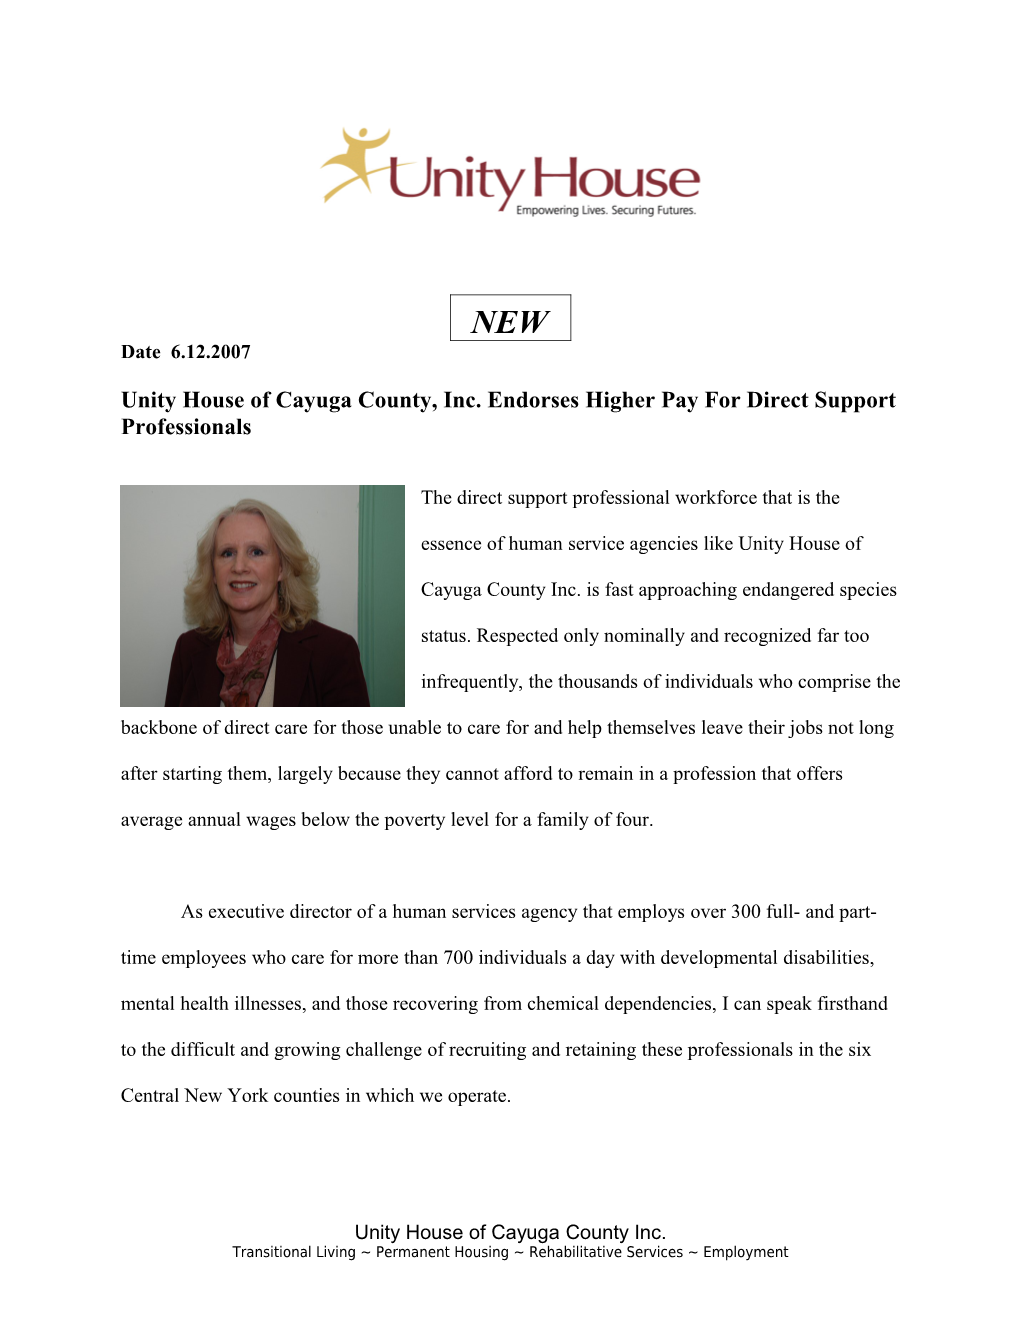 Unity House of Cayuga County, Inc. Endorses Higher Pay for Direct Support Professionals